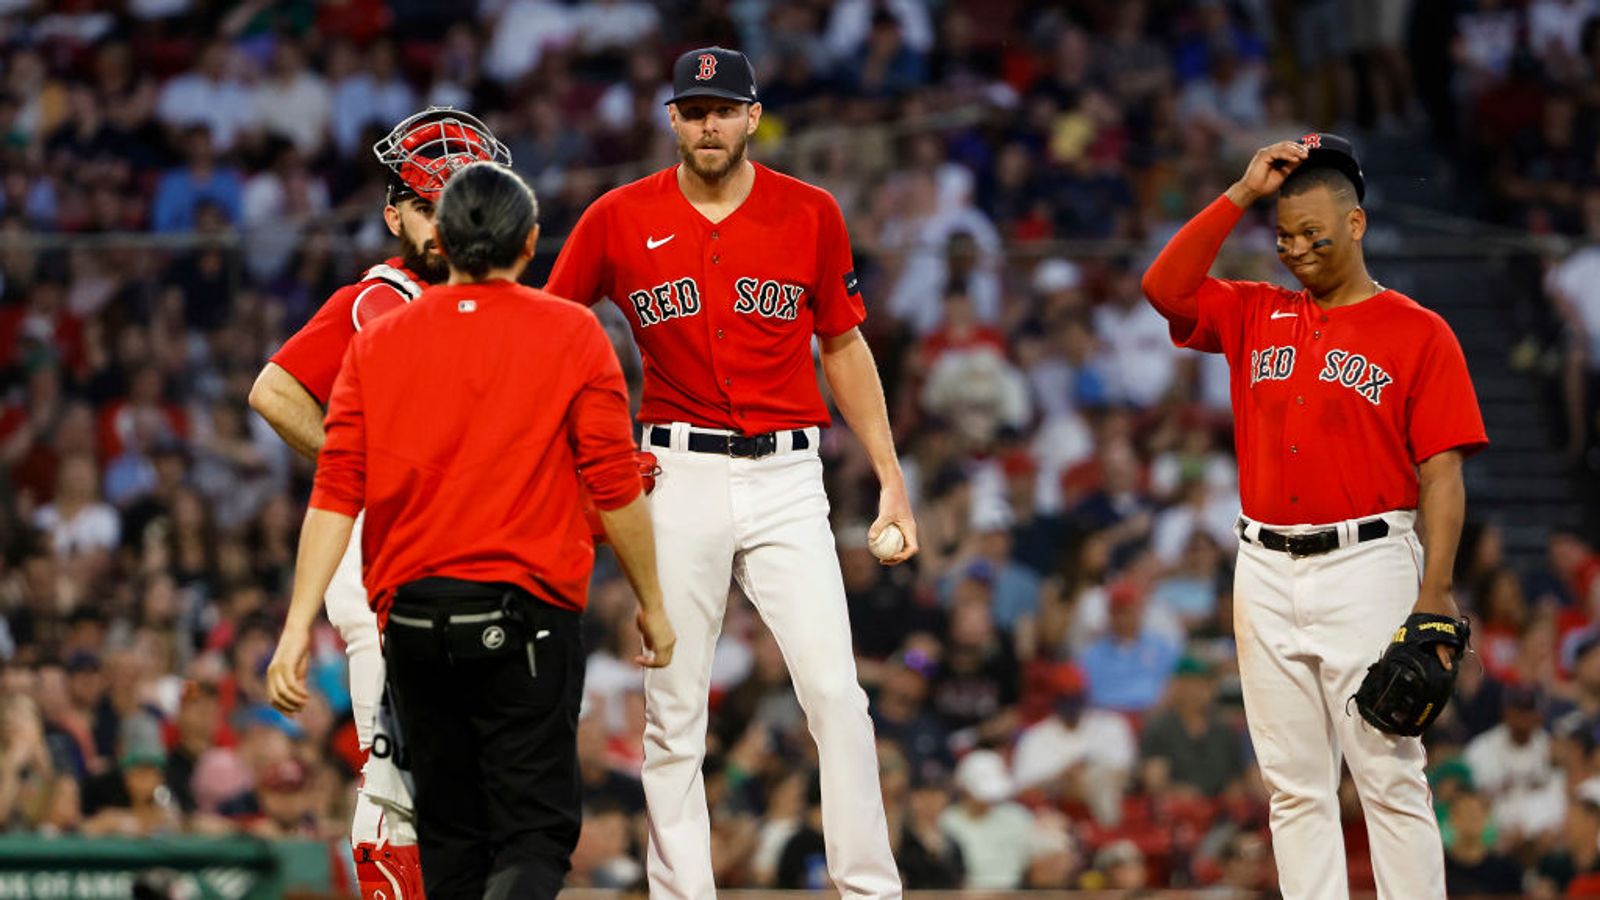 Donnelly: In a night full of positives, one negative looms large over the Red  Sox